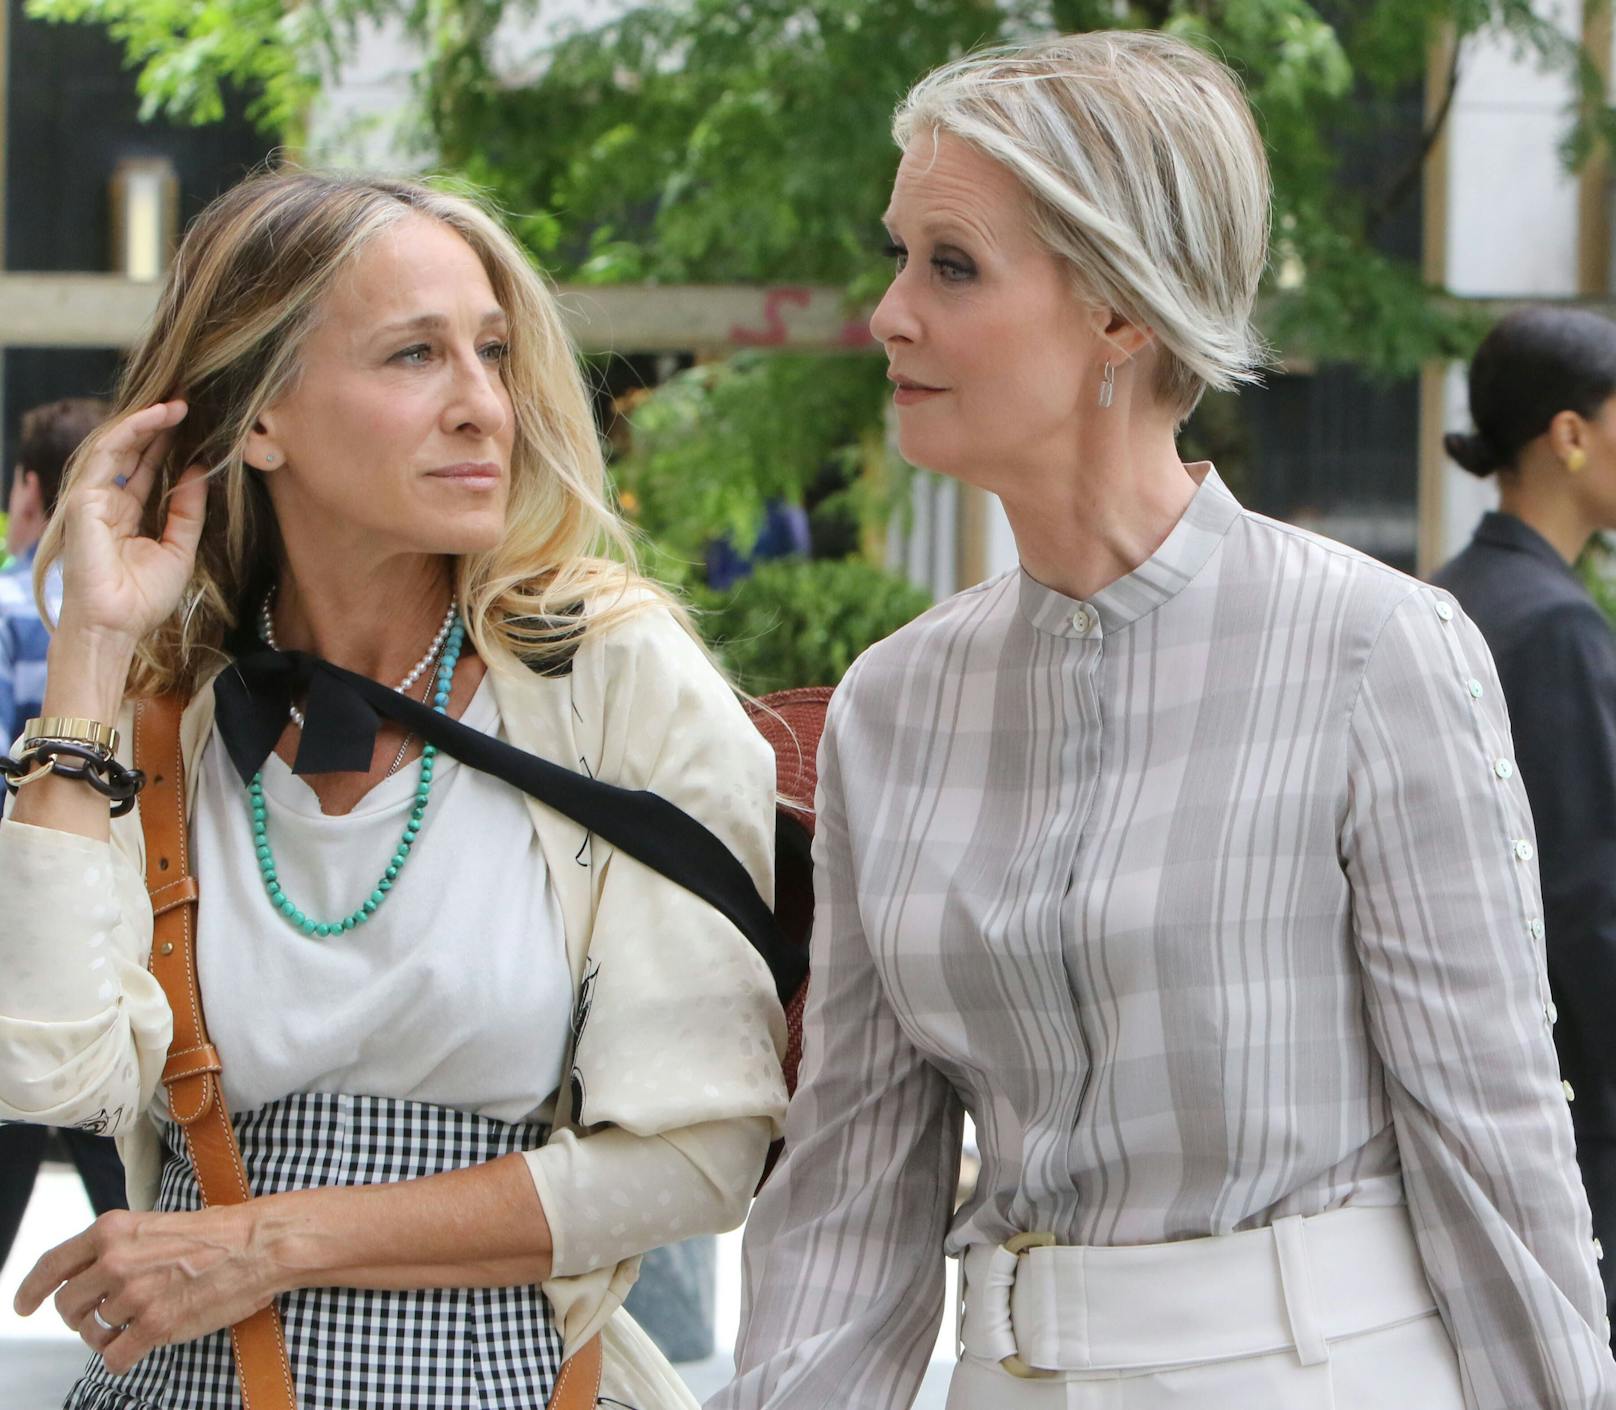 Sarah Jessica Parker (56) und Cynthia Nixon (55) am Set des "Sex and the City" Reboot "And just like that".&nbsp;